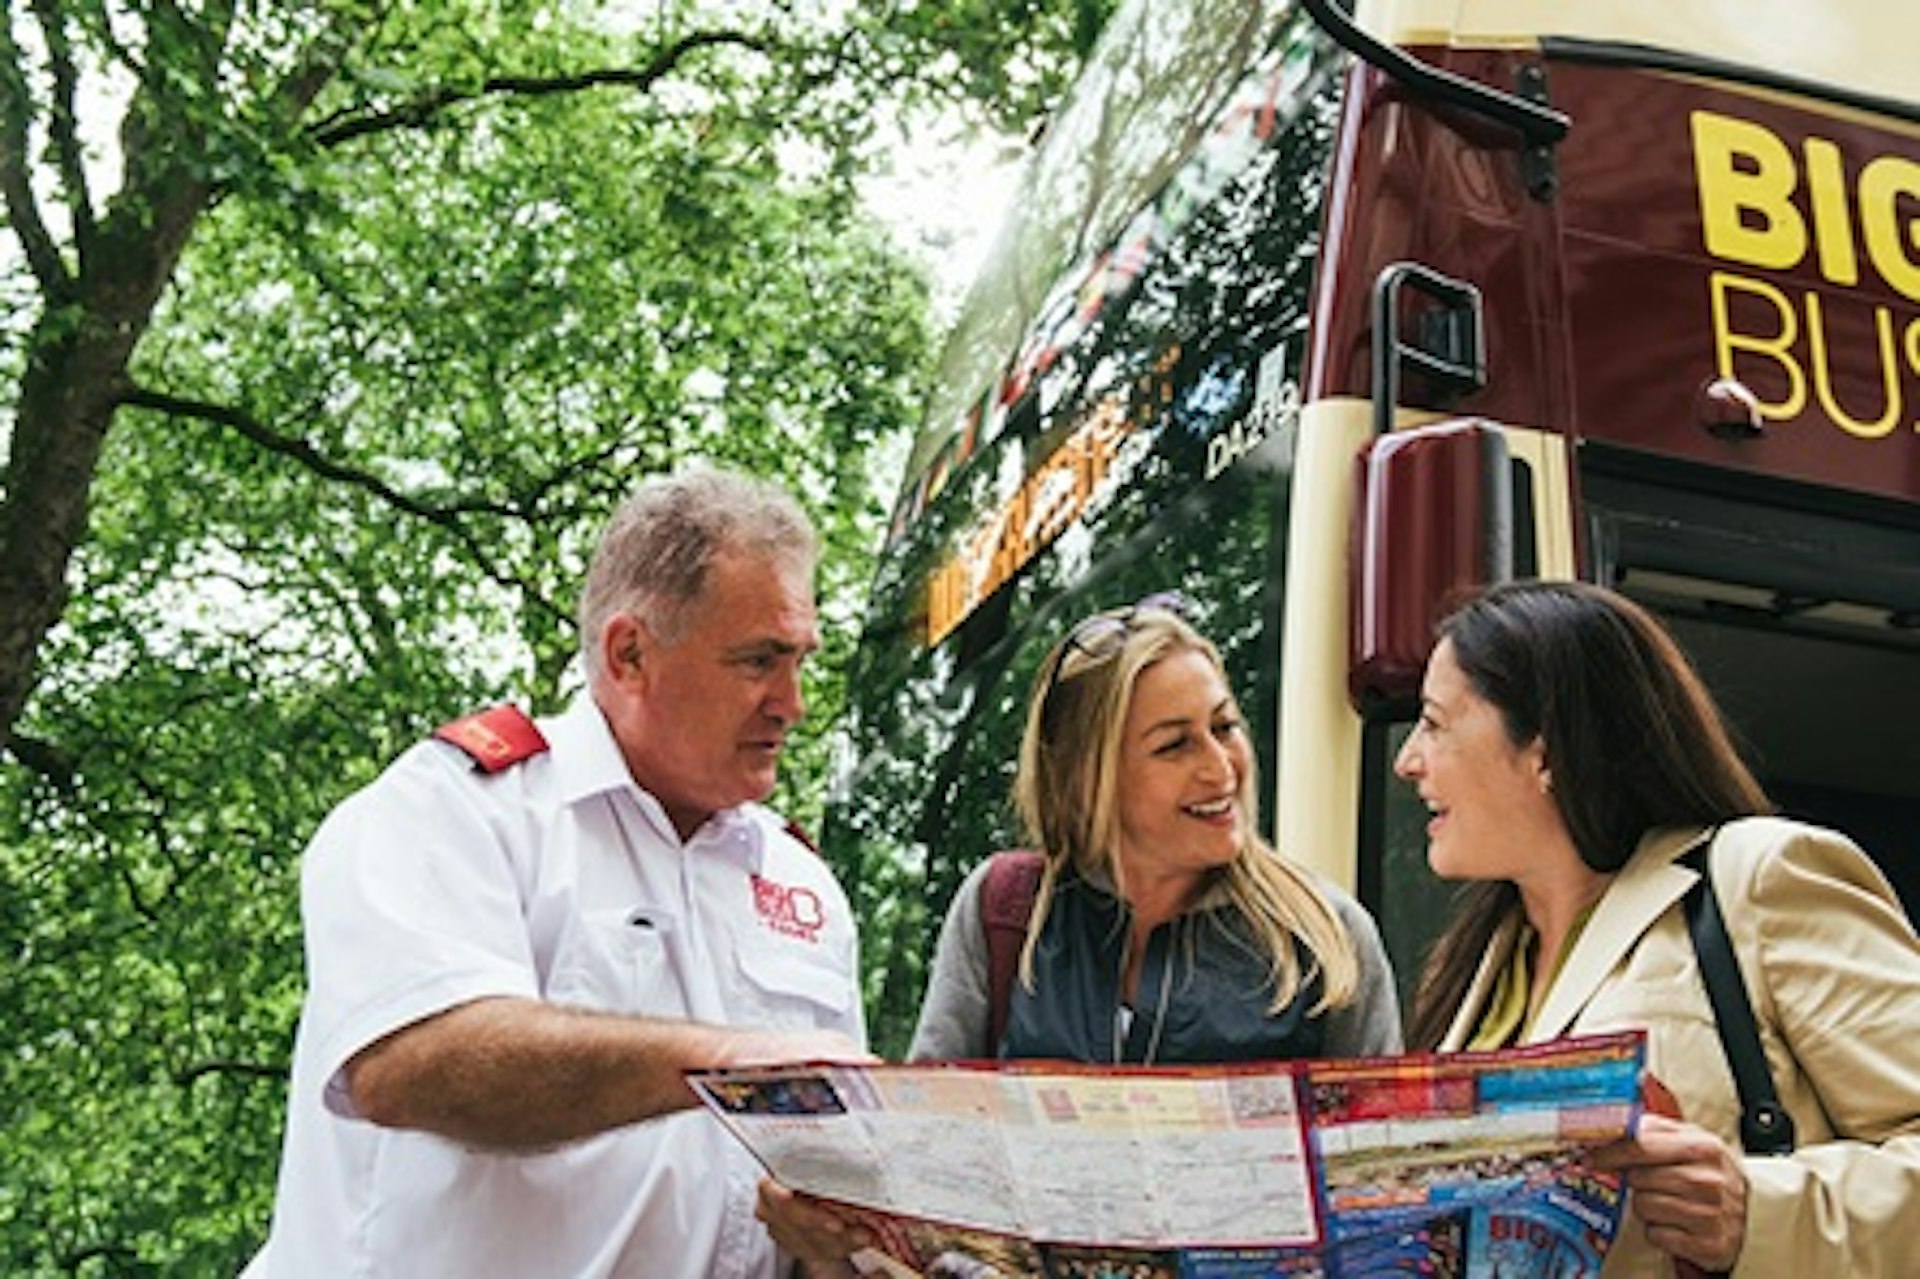 Explore London with Hop-On, Hop-Off Sightseeing Bus Tour and River Cruise for Two 3